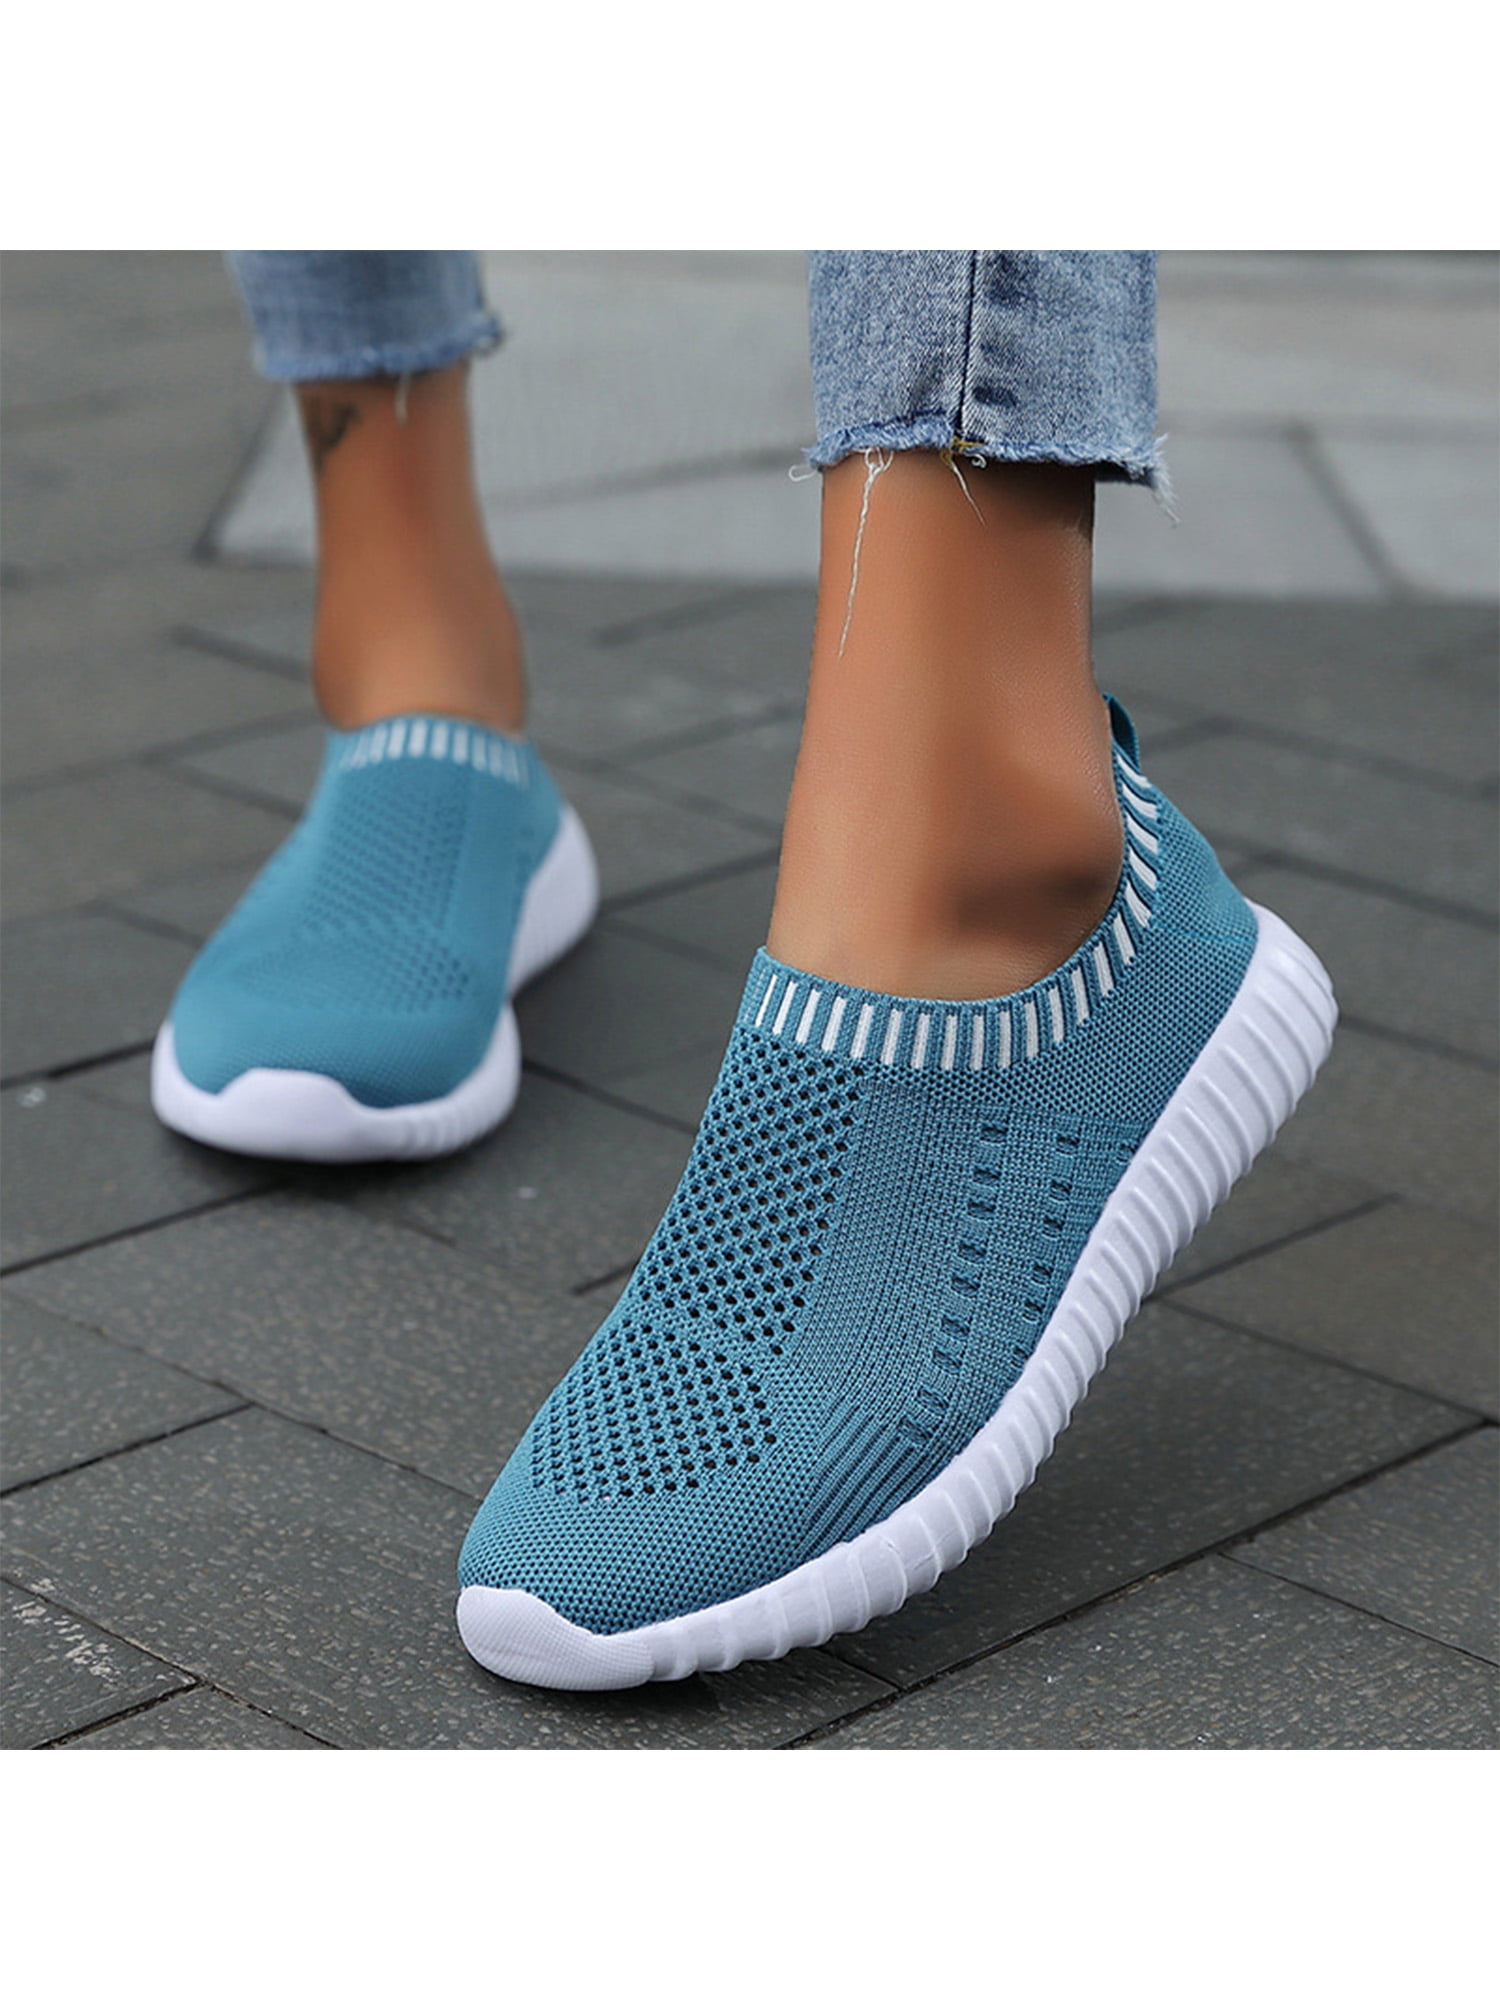 XIANV Women Men Running Shoes Breathable Slip On Sneakers Mesh Sport Athletic Fashion Tennis Comfort Fitness Walking Shoes